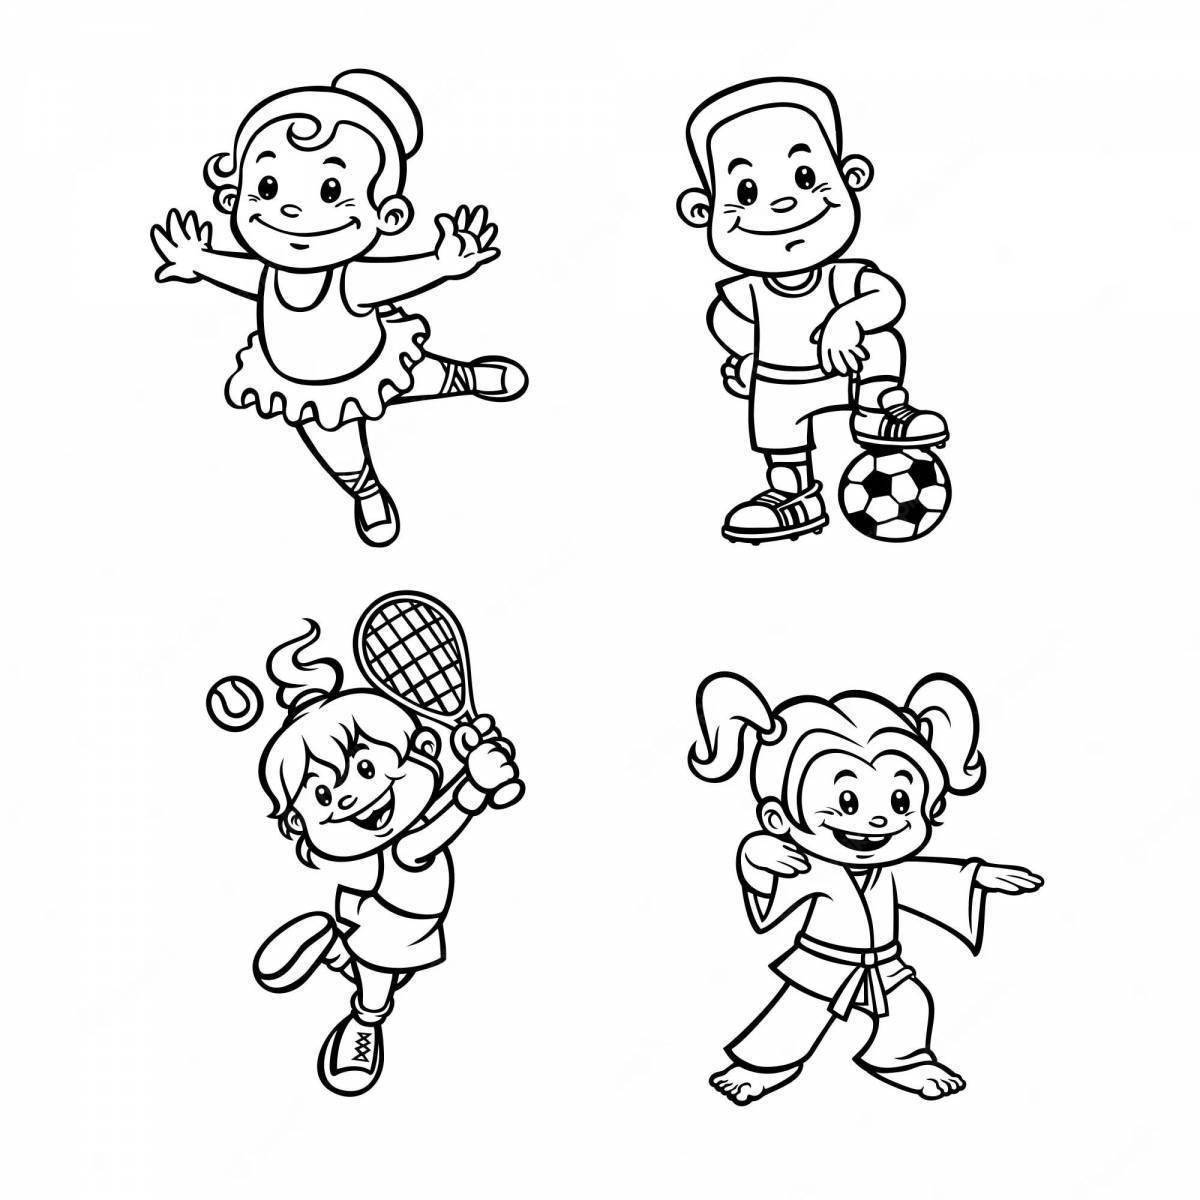 Great sports coloring book for 5-6 year olds